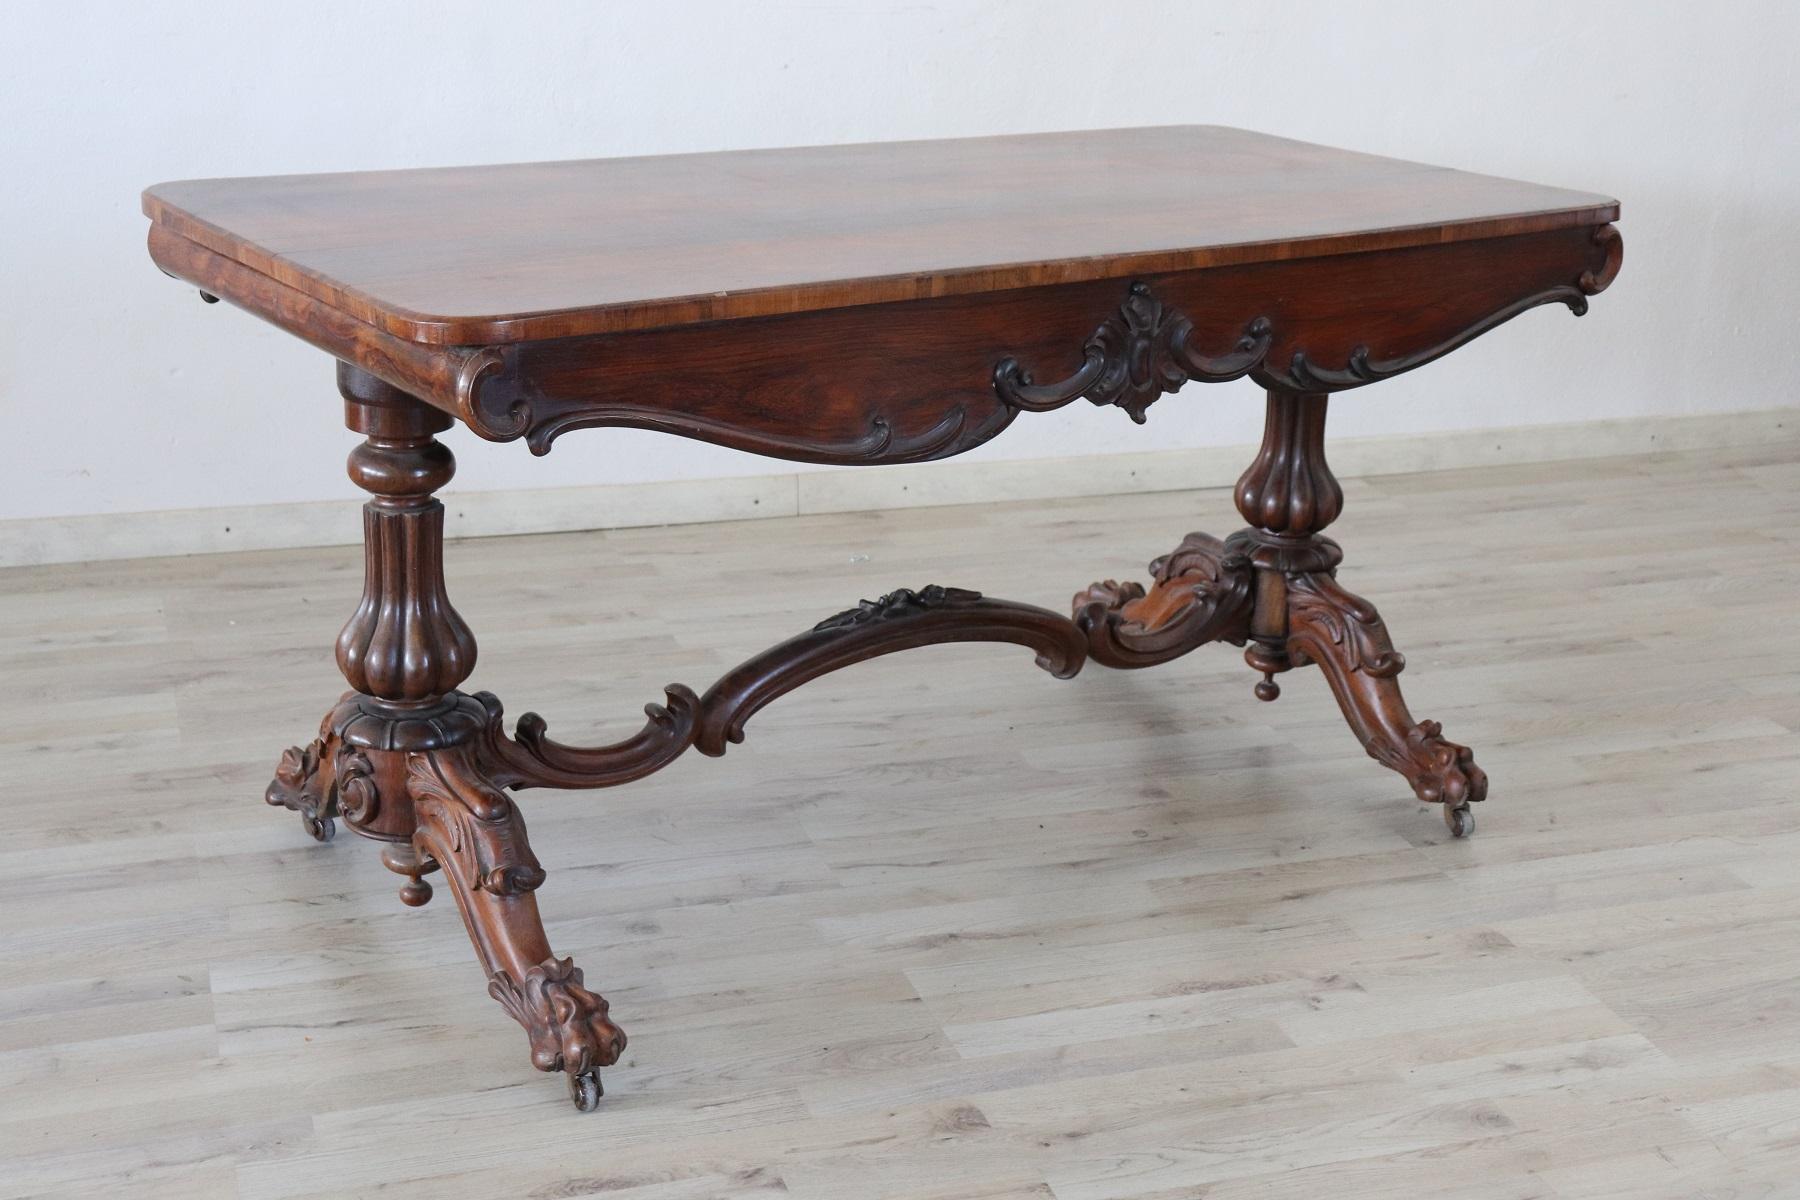 Elegant and antique Italian writing desk, 1880s. The desk is made of solid walnut wood. Important turned and carved legs. Plenty of space for your writing needs. At the feet ancient wheels that allow a comfortable movement.